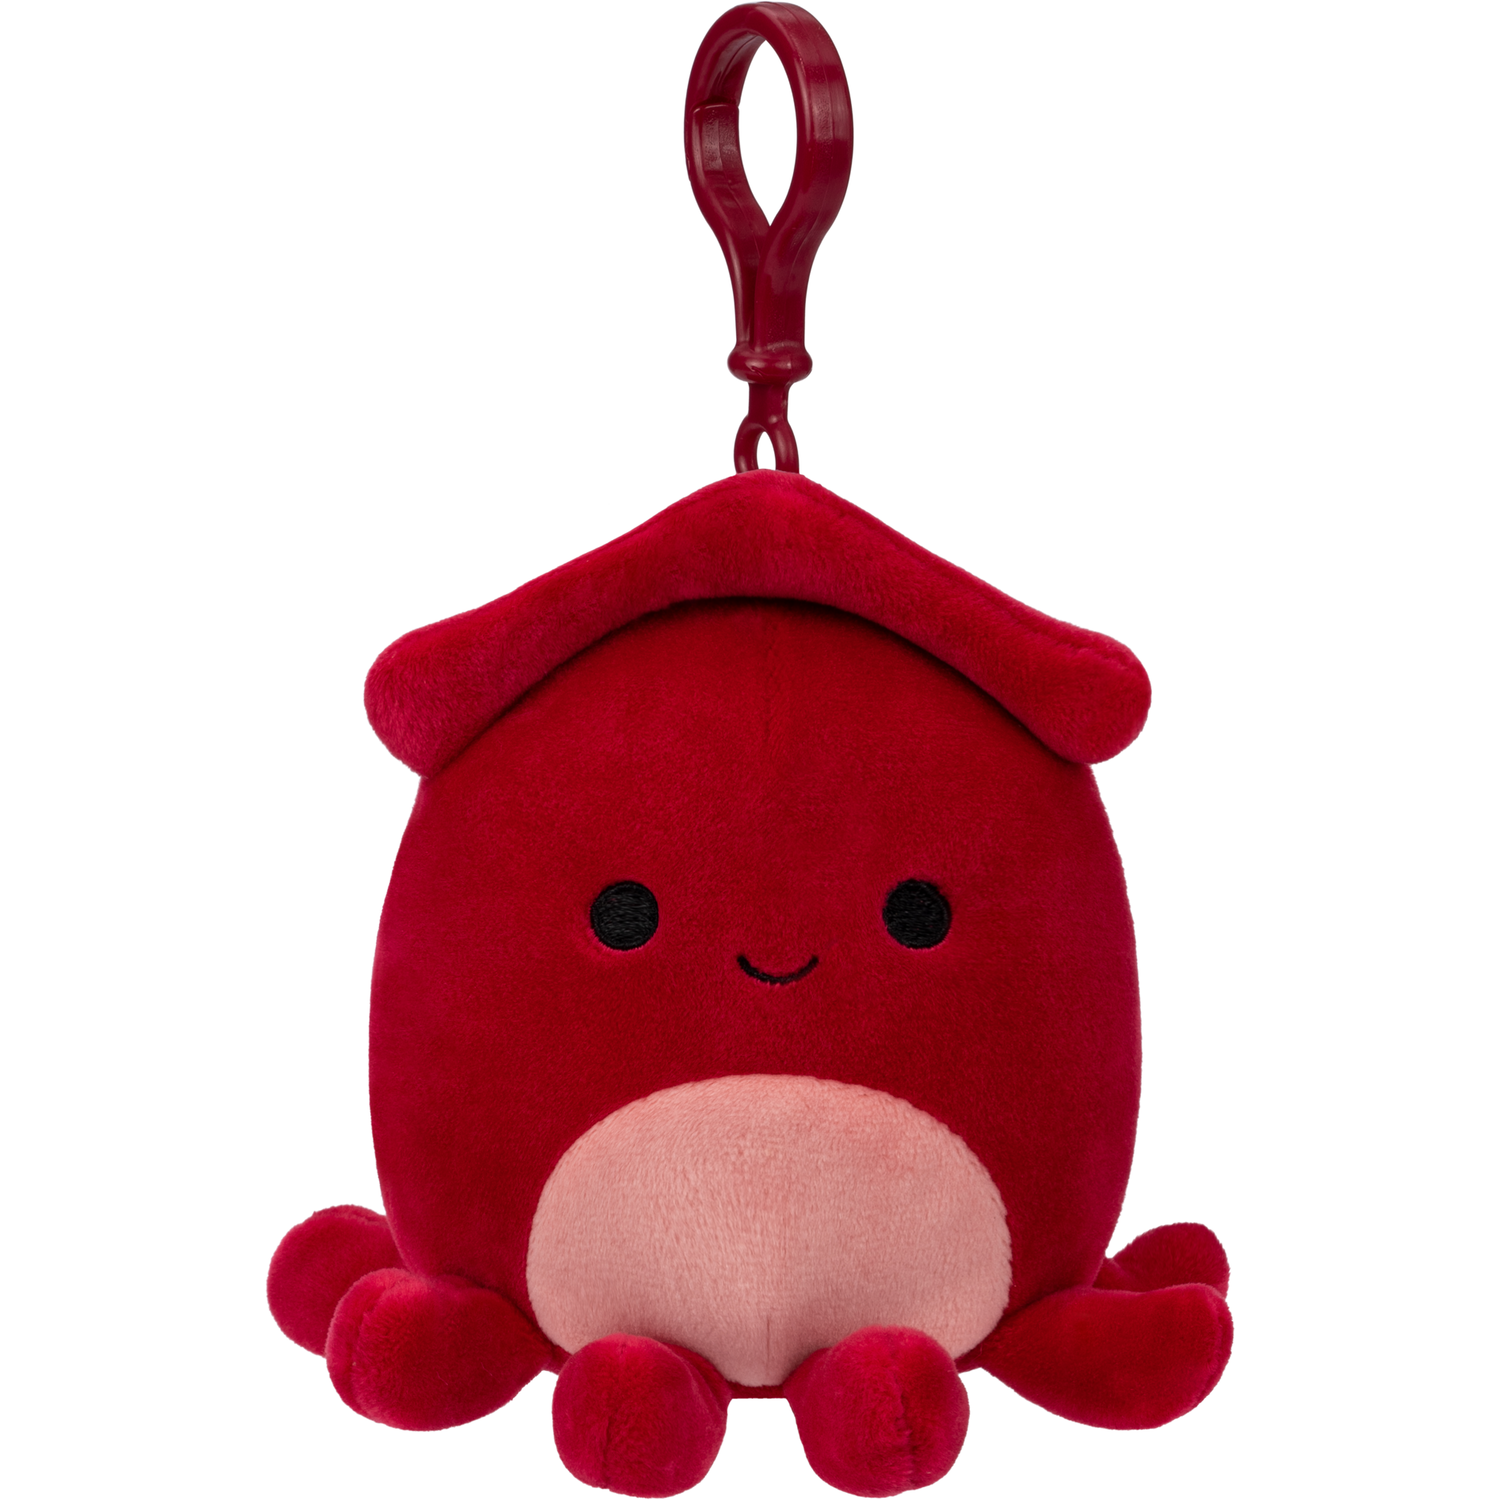 Single Clip-On Squishmallows Plush in Assorted styles Image 2